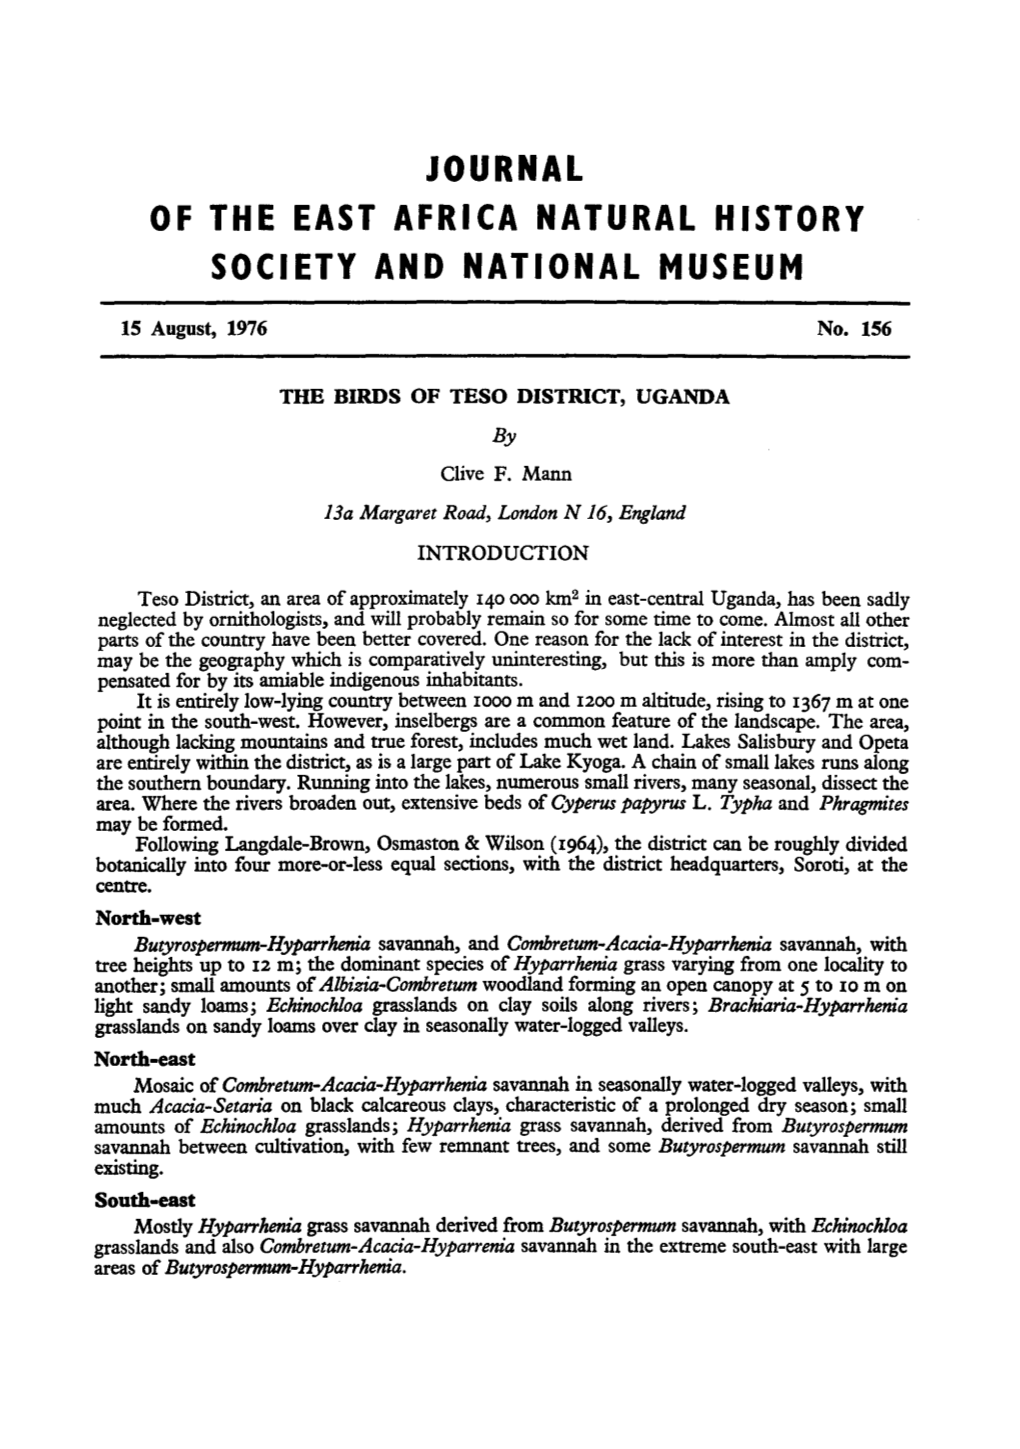 Journal of the East Africa Natural History